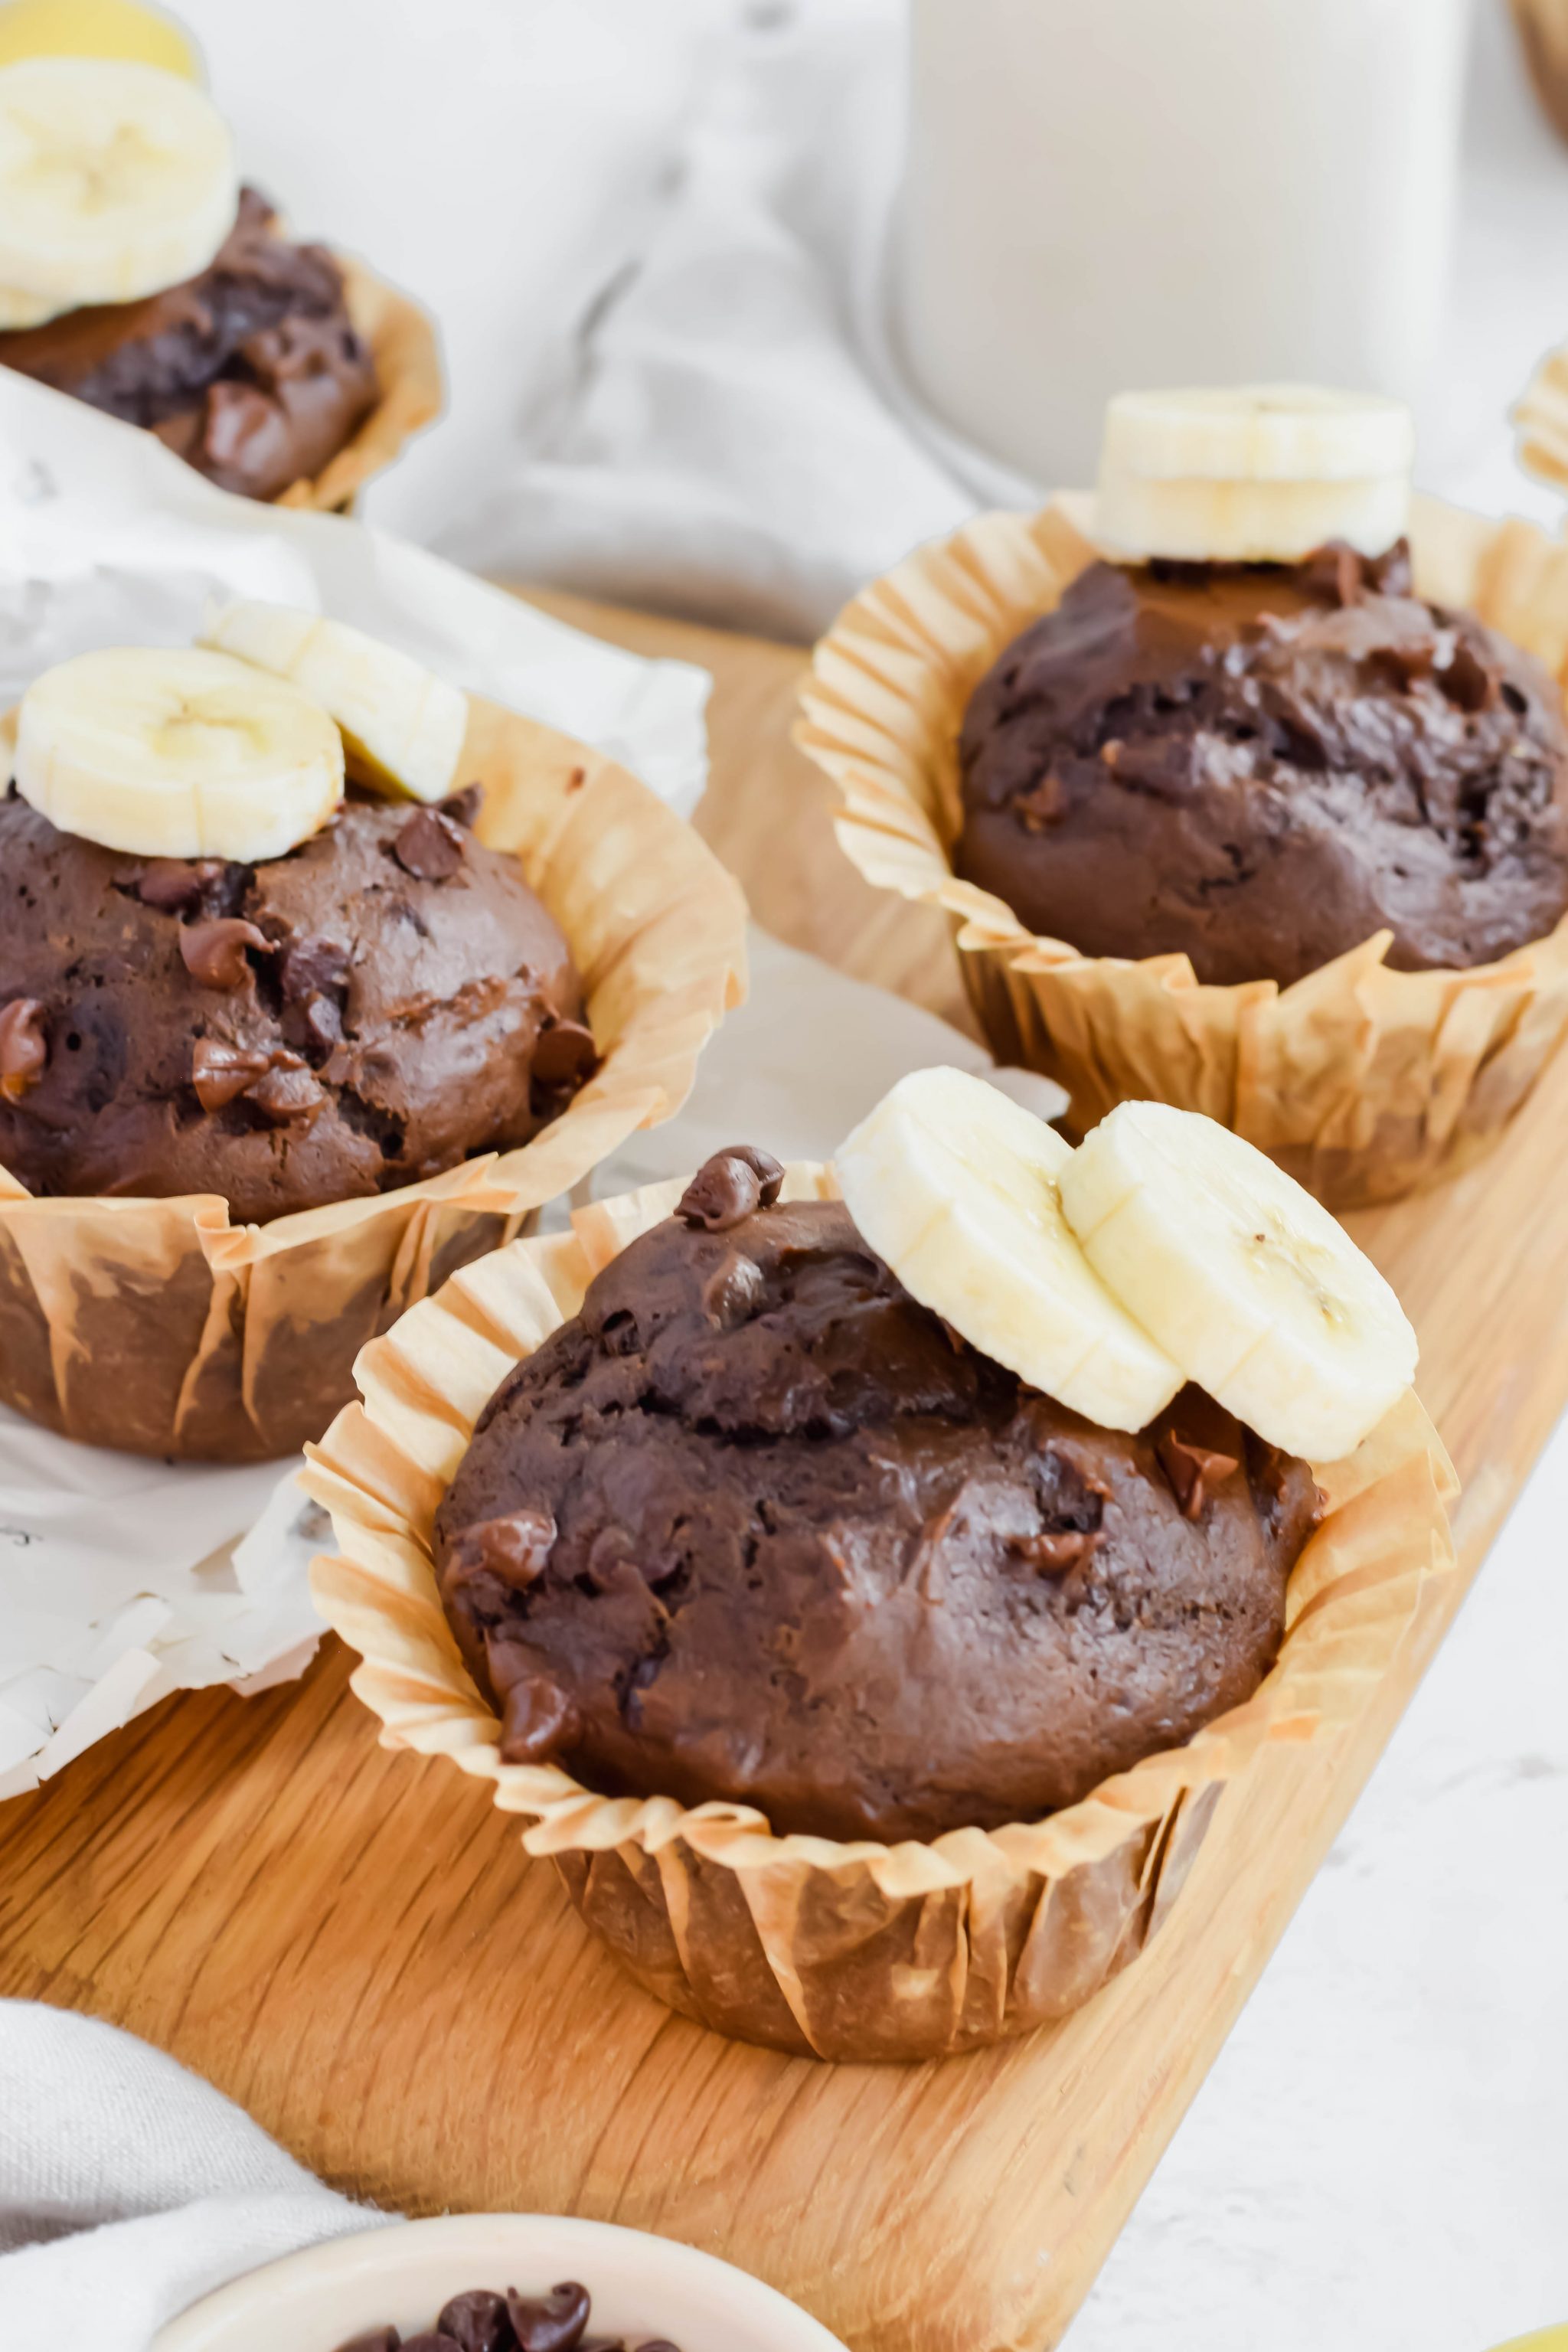 Three chocolate banana muffins topped with fresh banana slices in tan parchment liners on wood board